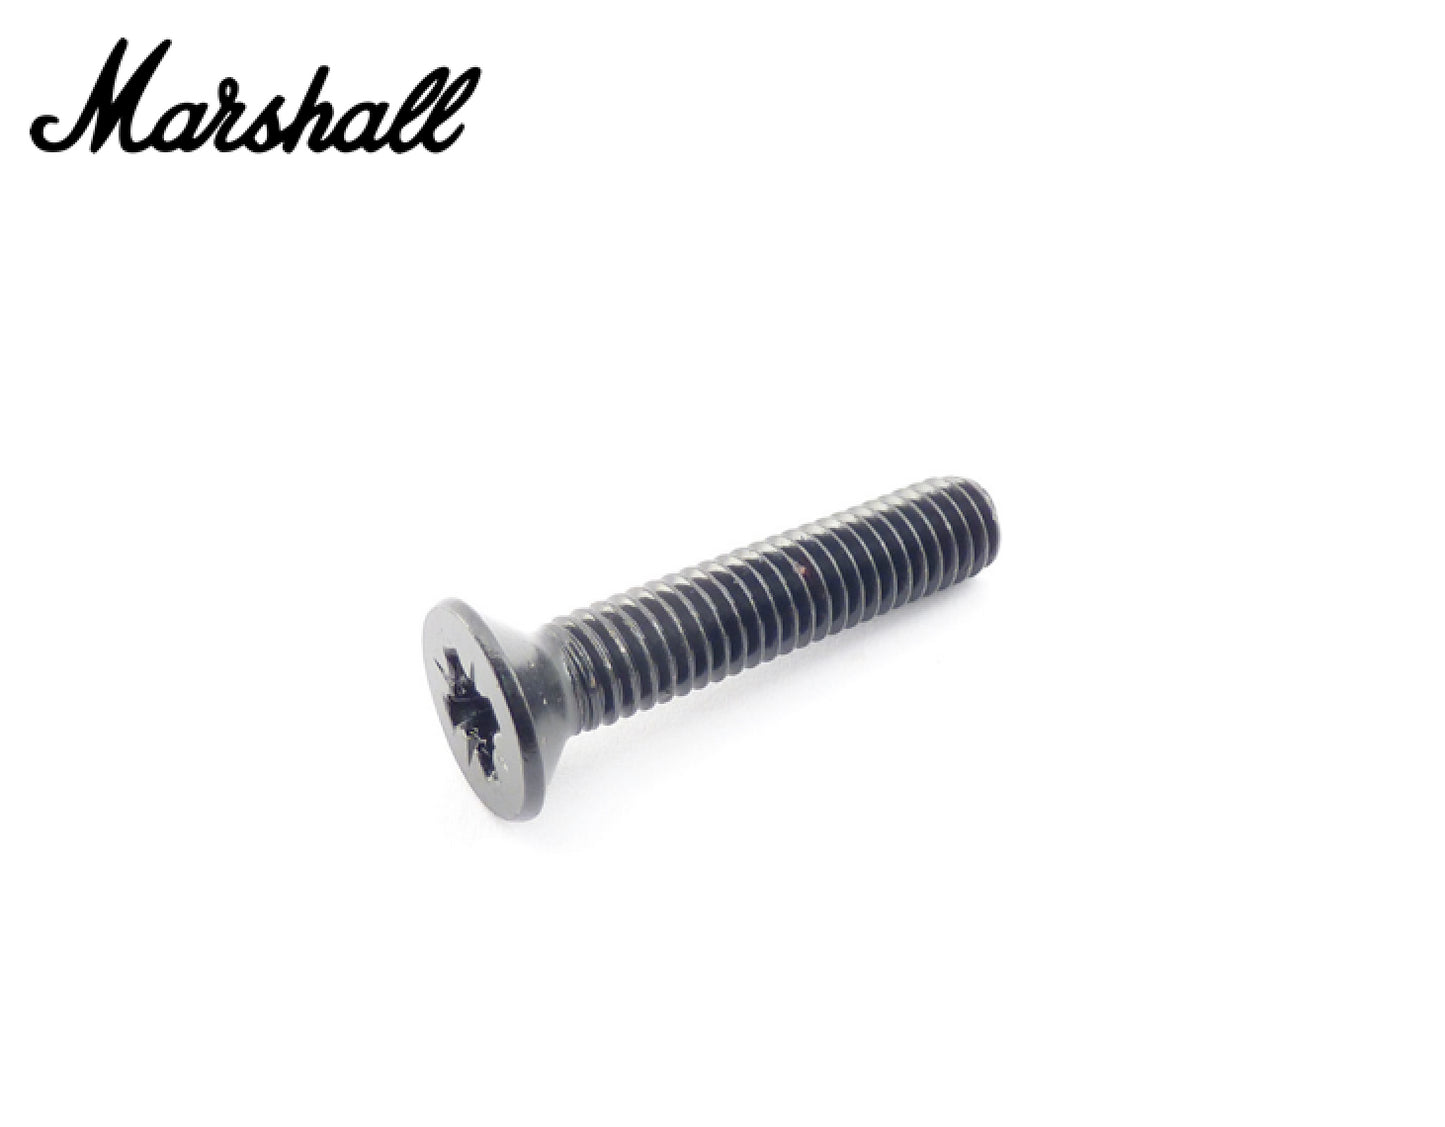 Marshall® Amplifier Chassis Screw M6 x 30mm